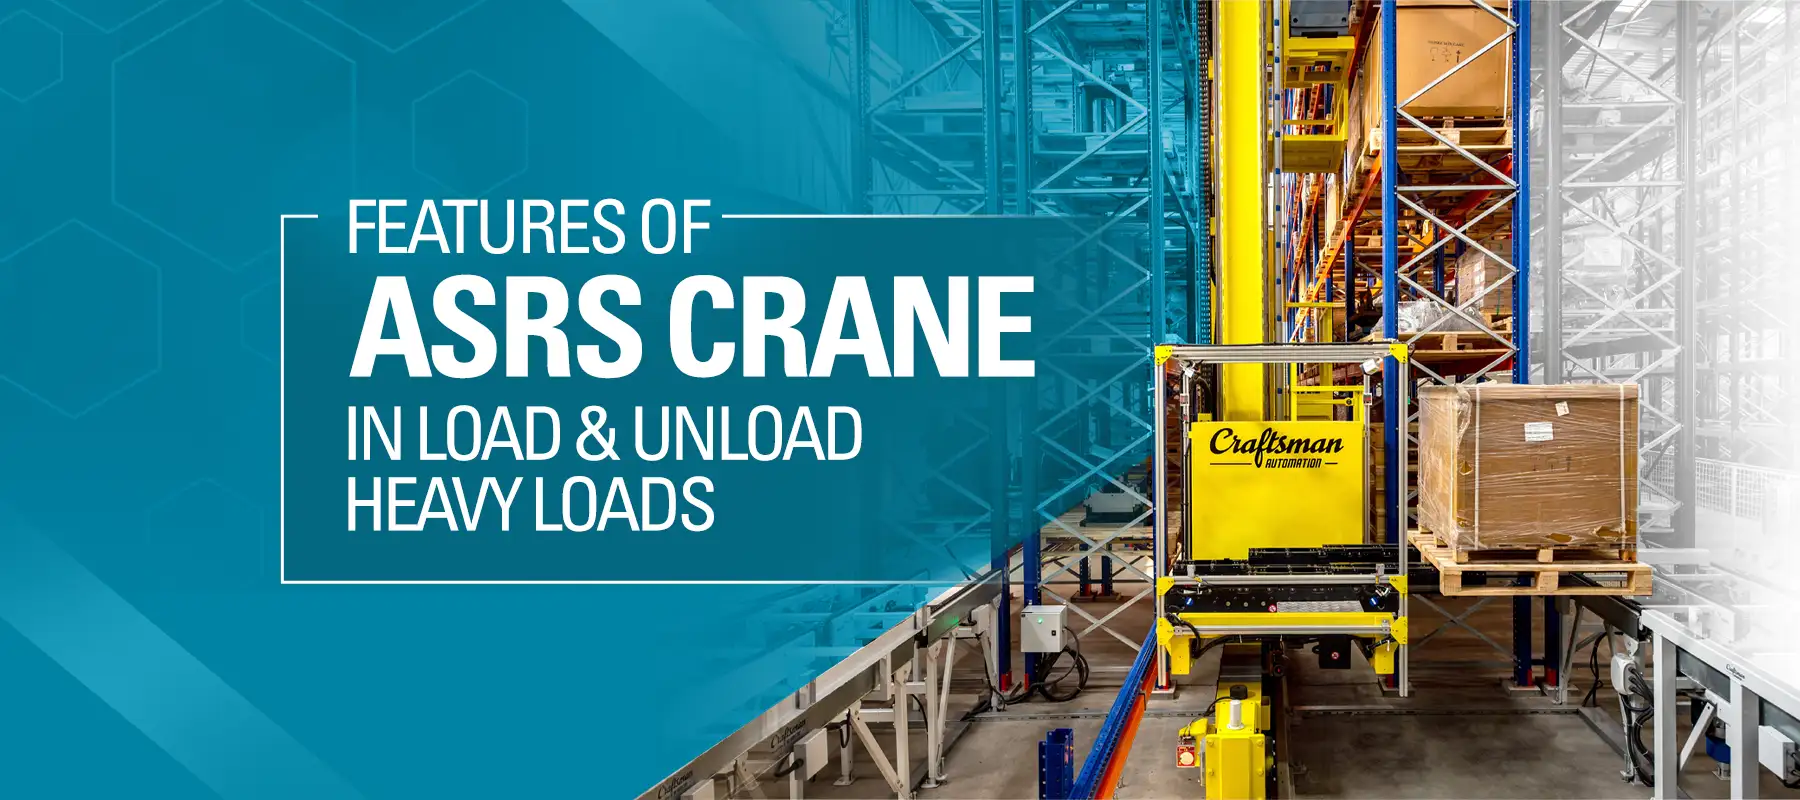 Features of ASRS Crane in Load and Unload Heavy Loads